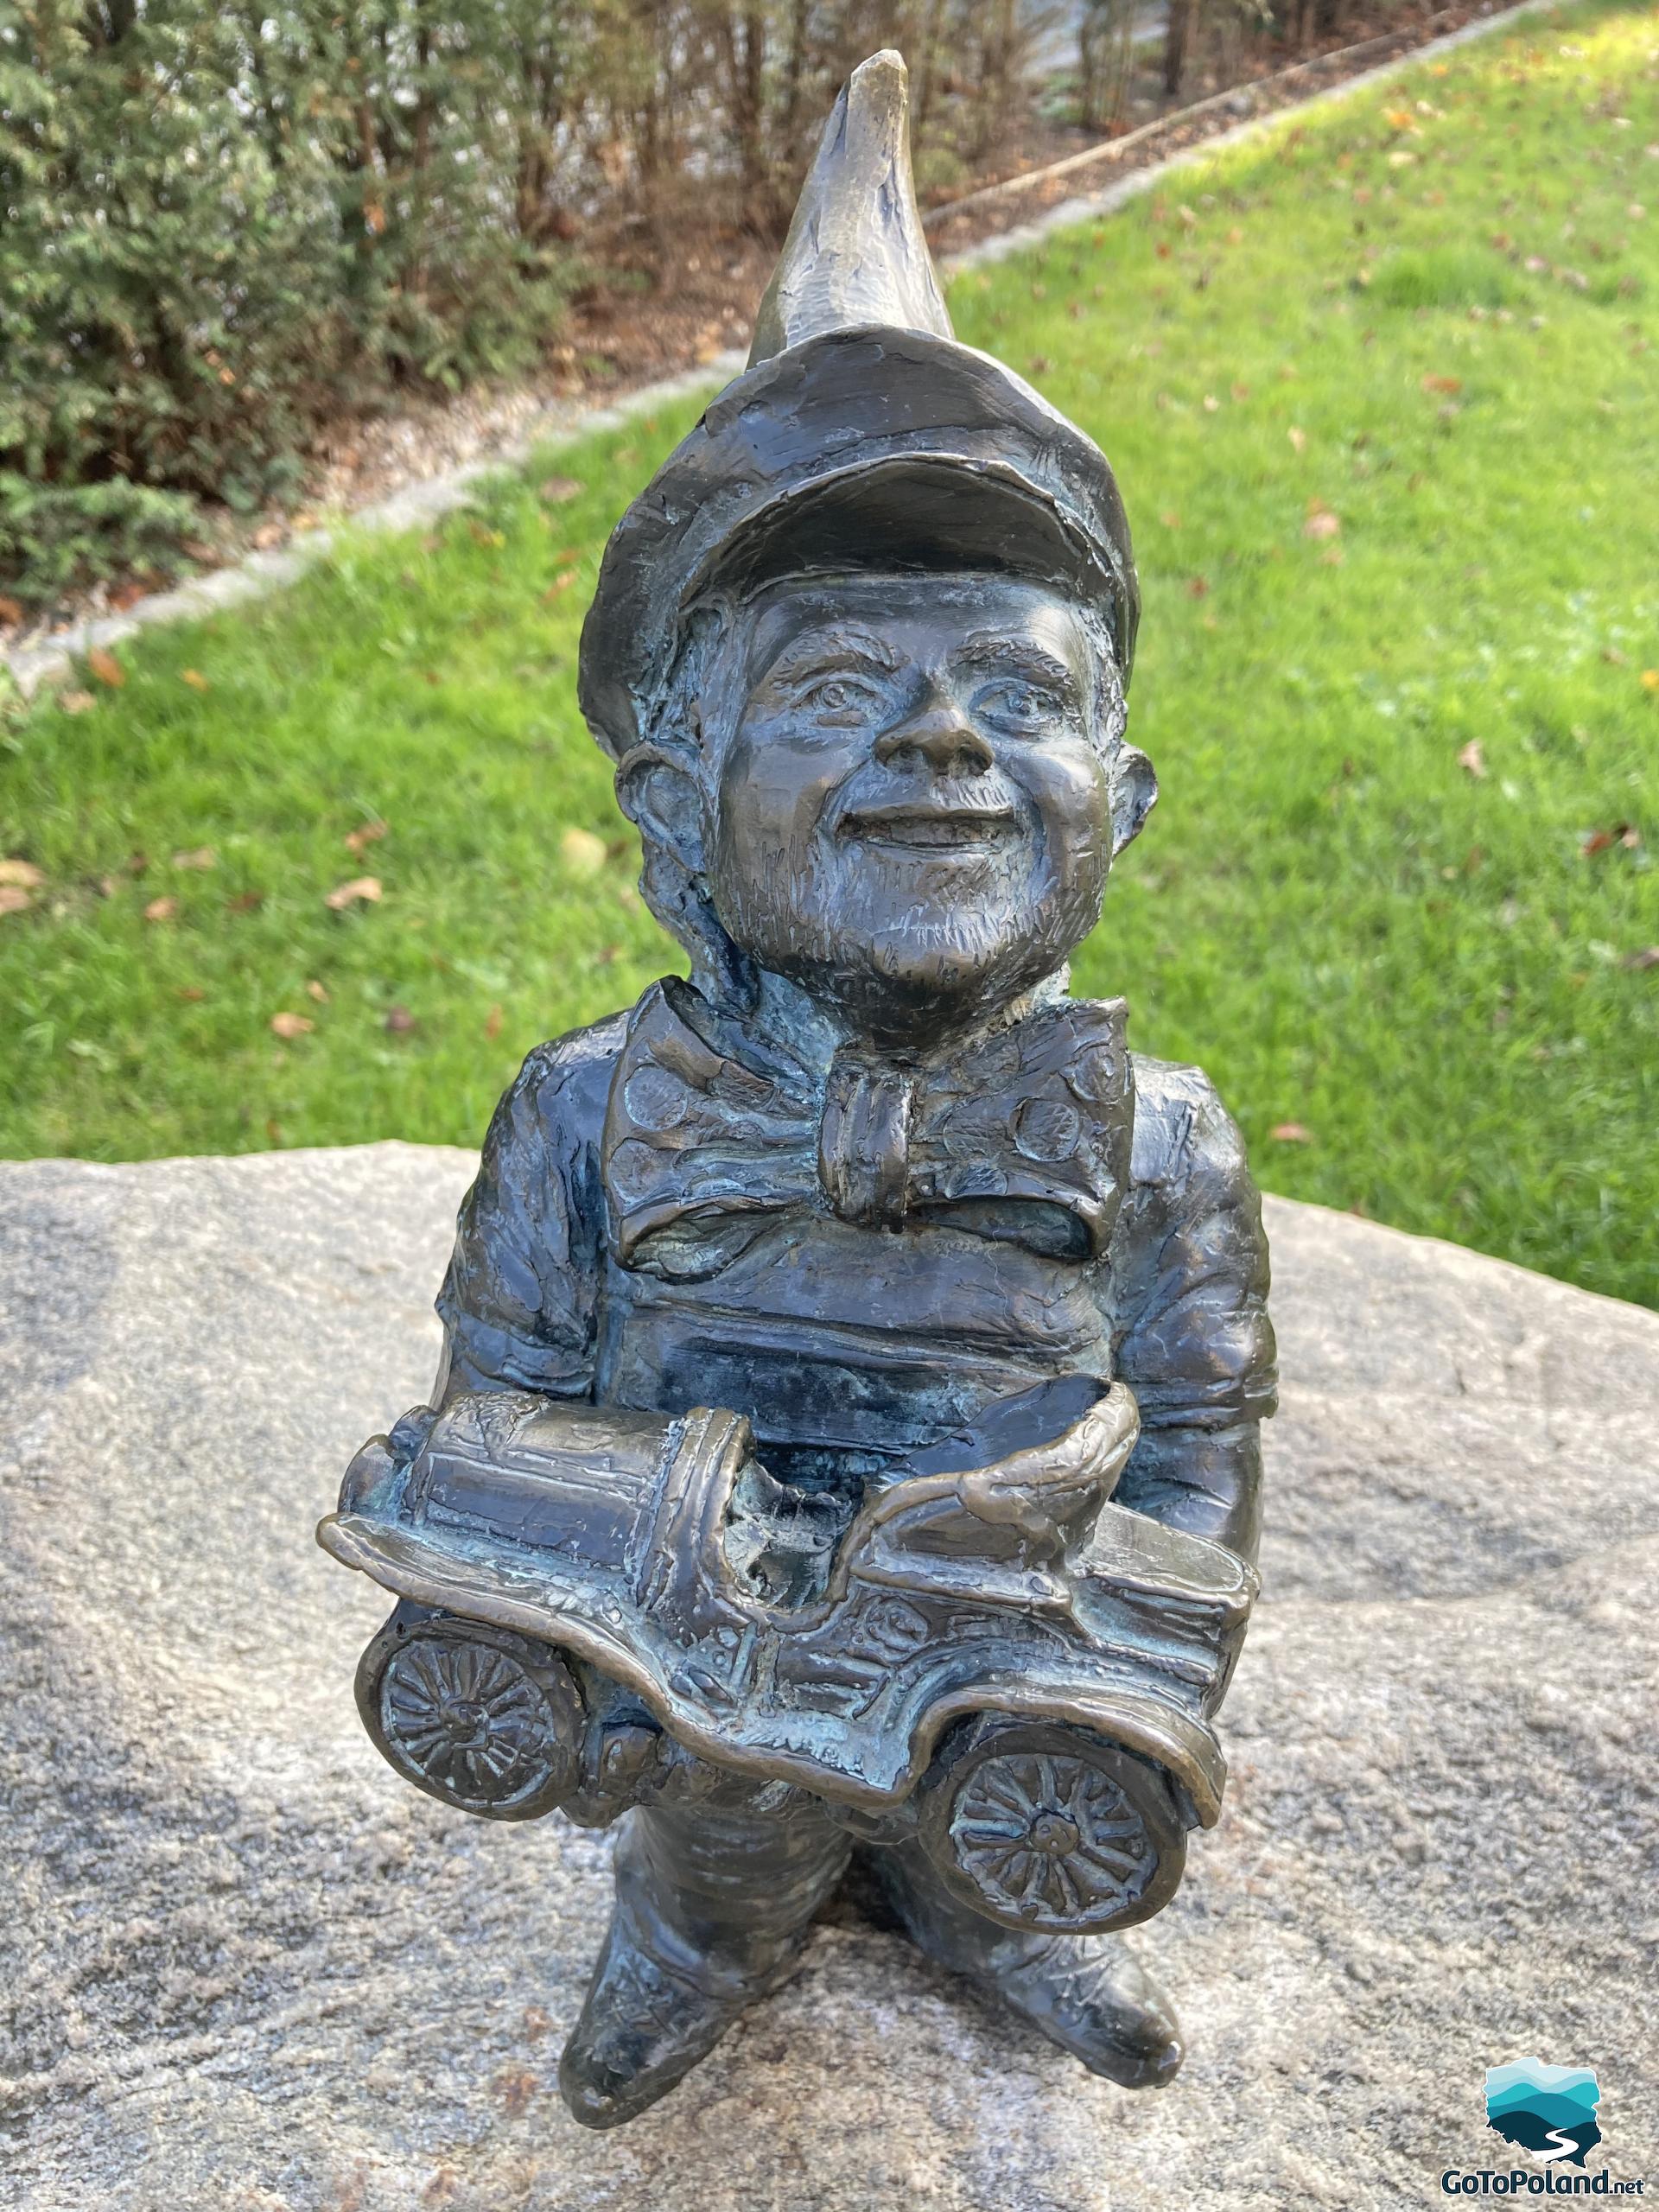 The sculpture shows a little gnome holding an old car in his hands